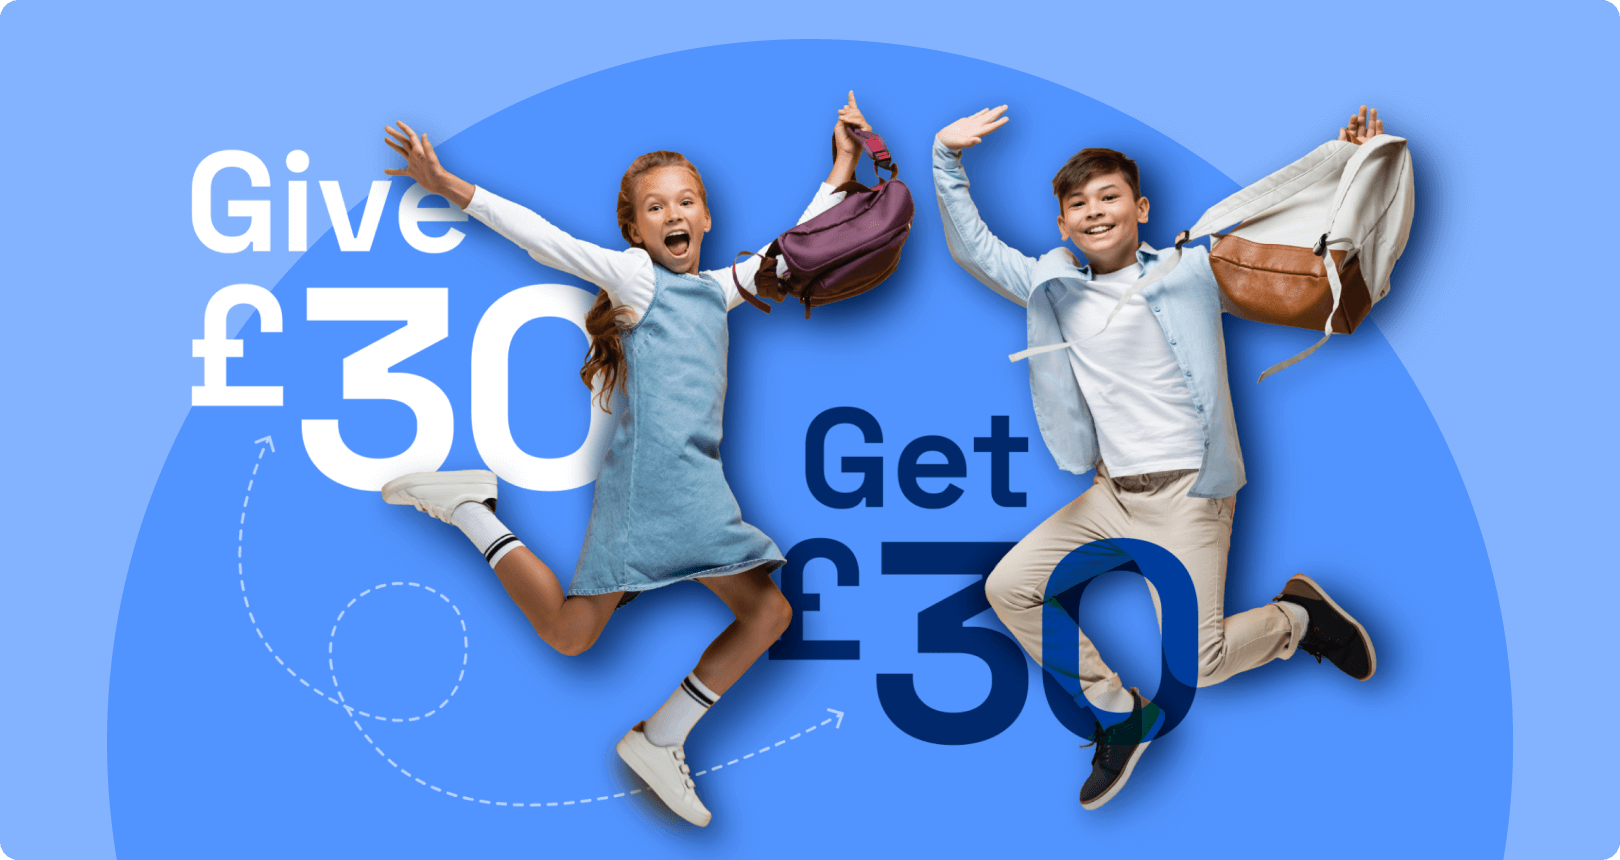 Give £30, get £30